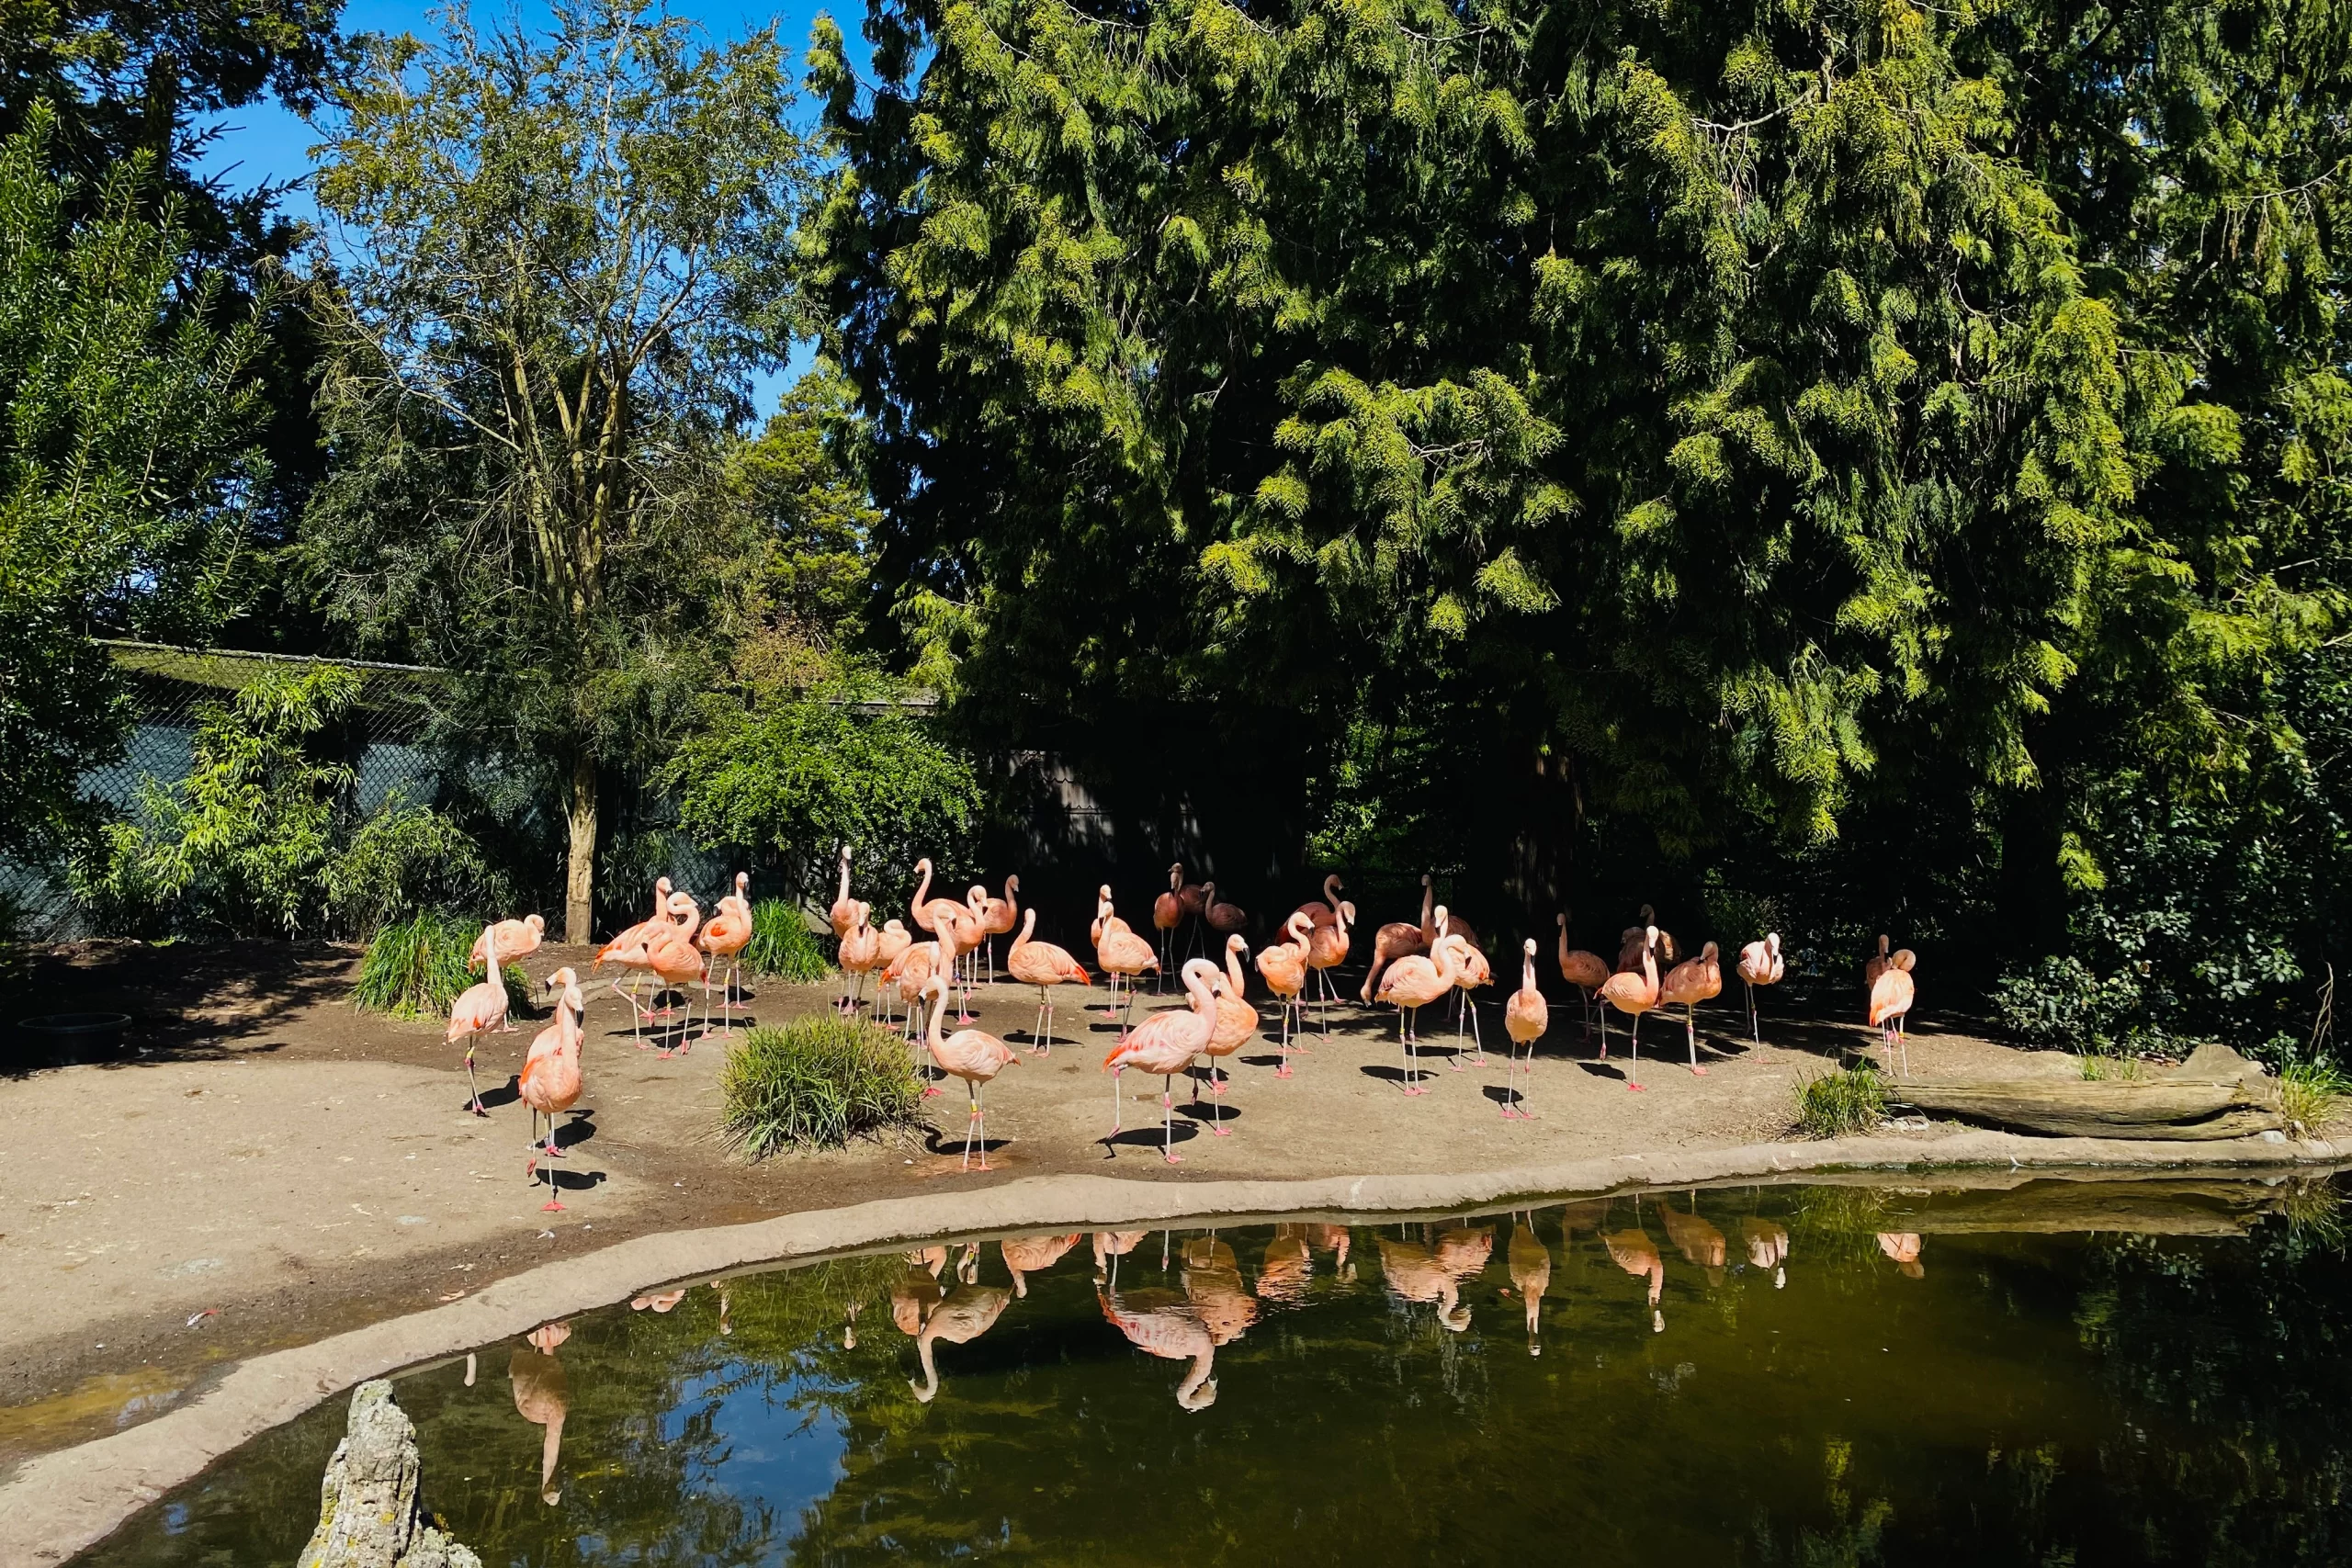 Flamingoes in the park